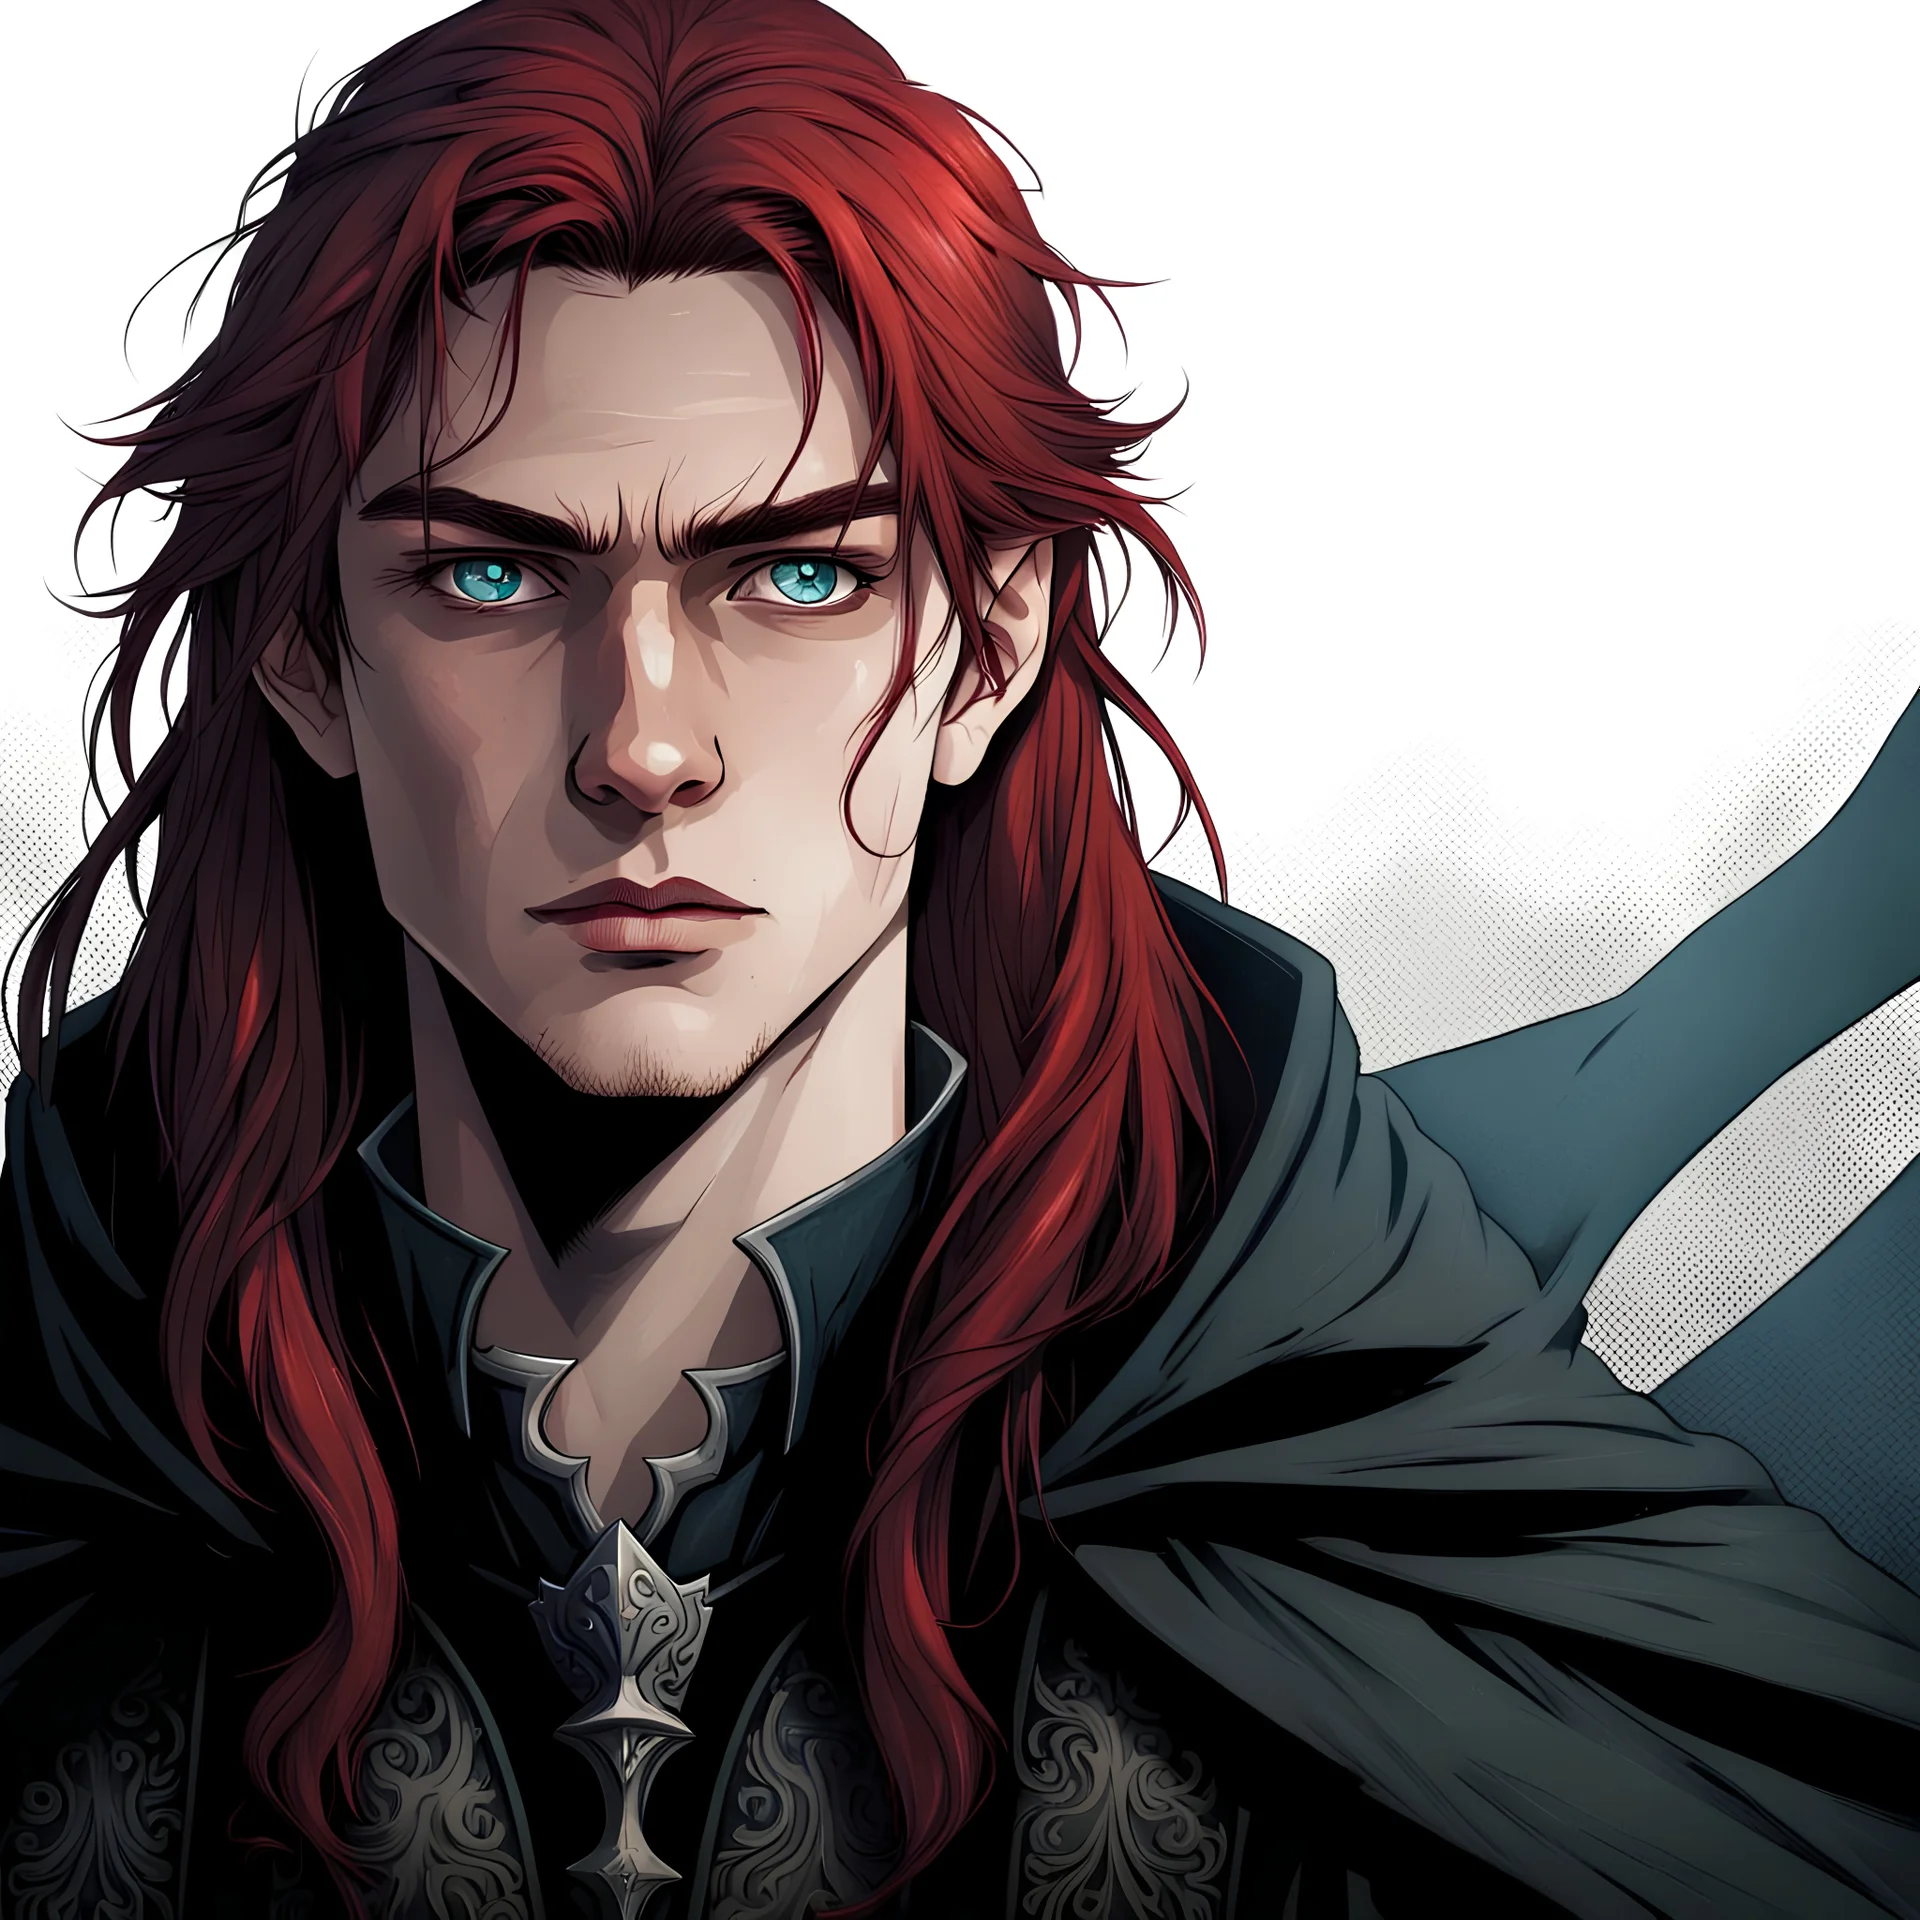 a young 19 years old half-vampire. handsome. dressed in medieval dark clothes and gray mantle. long red hair. light blue eyes. defiant look